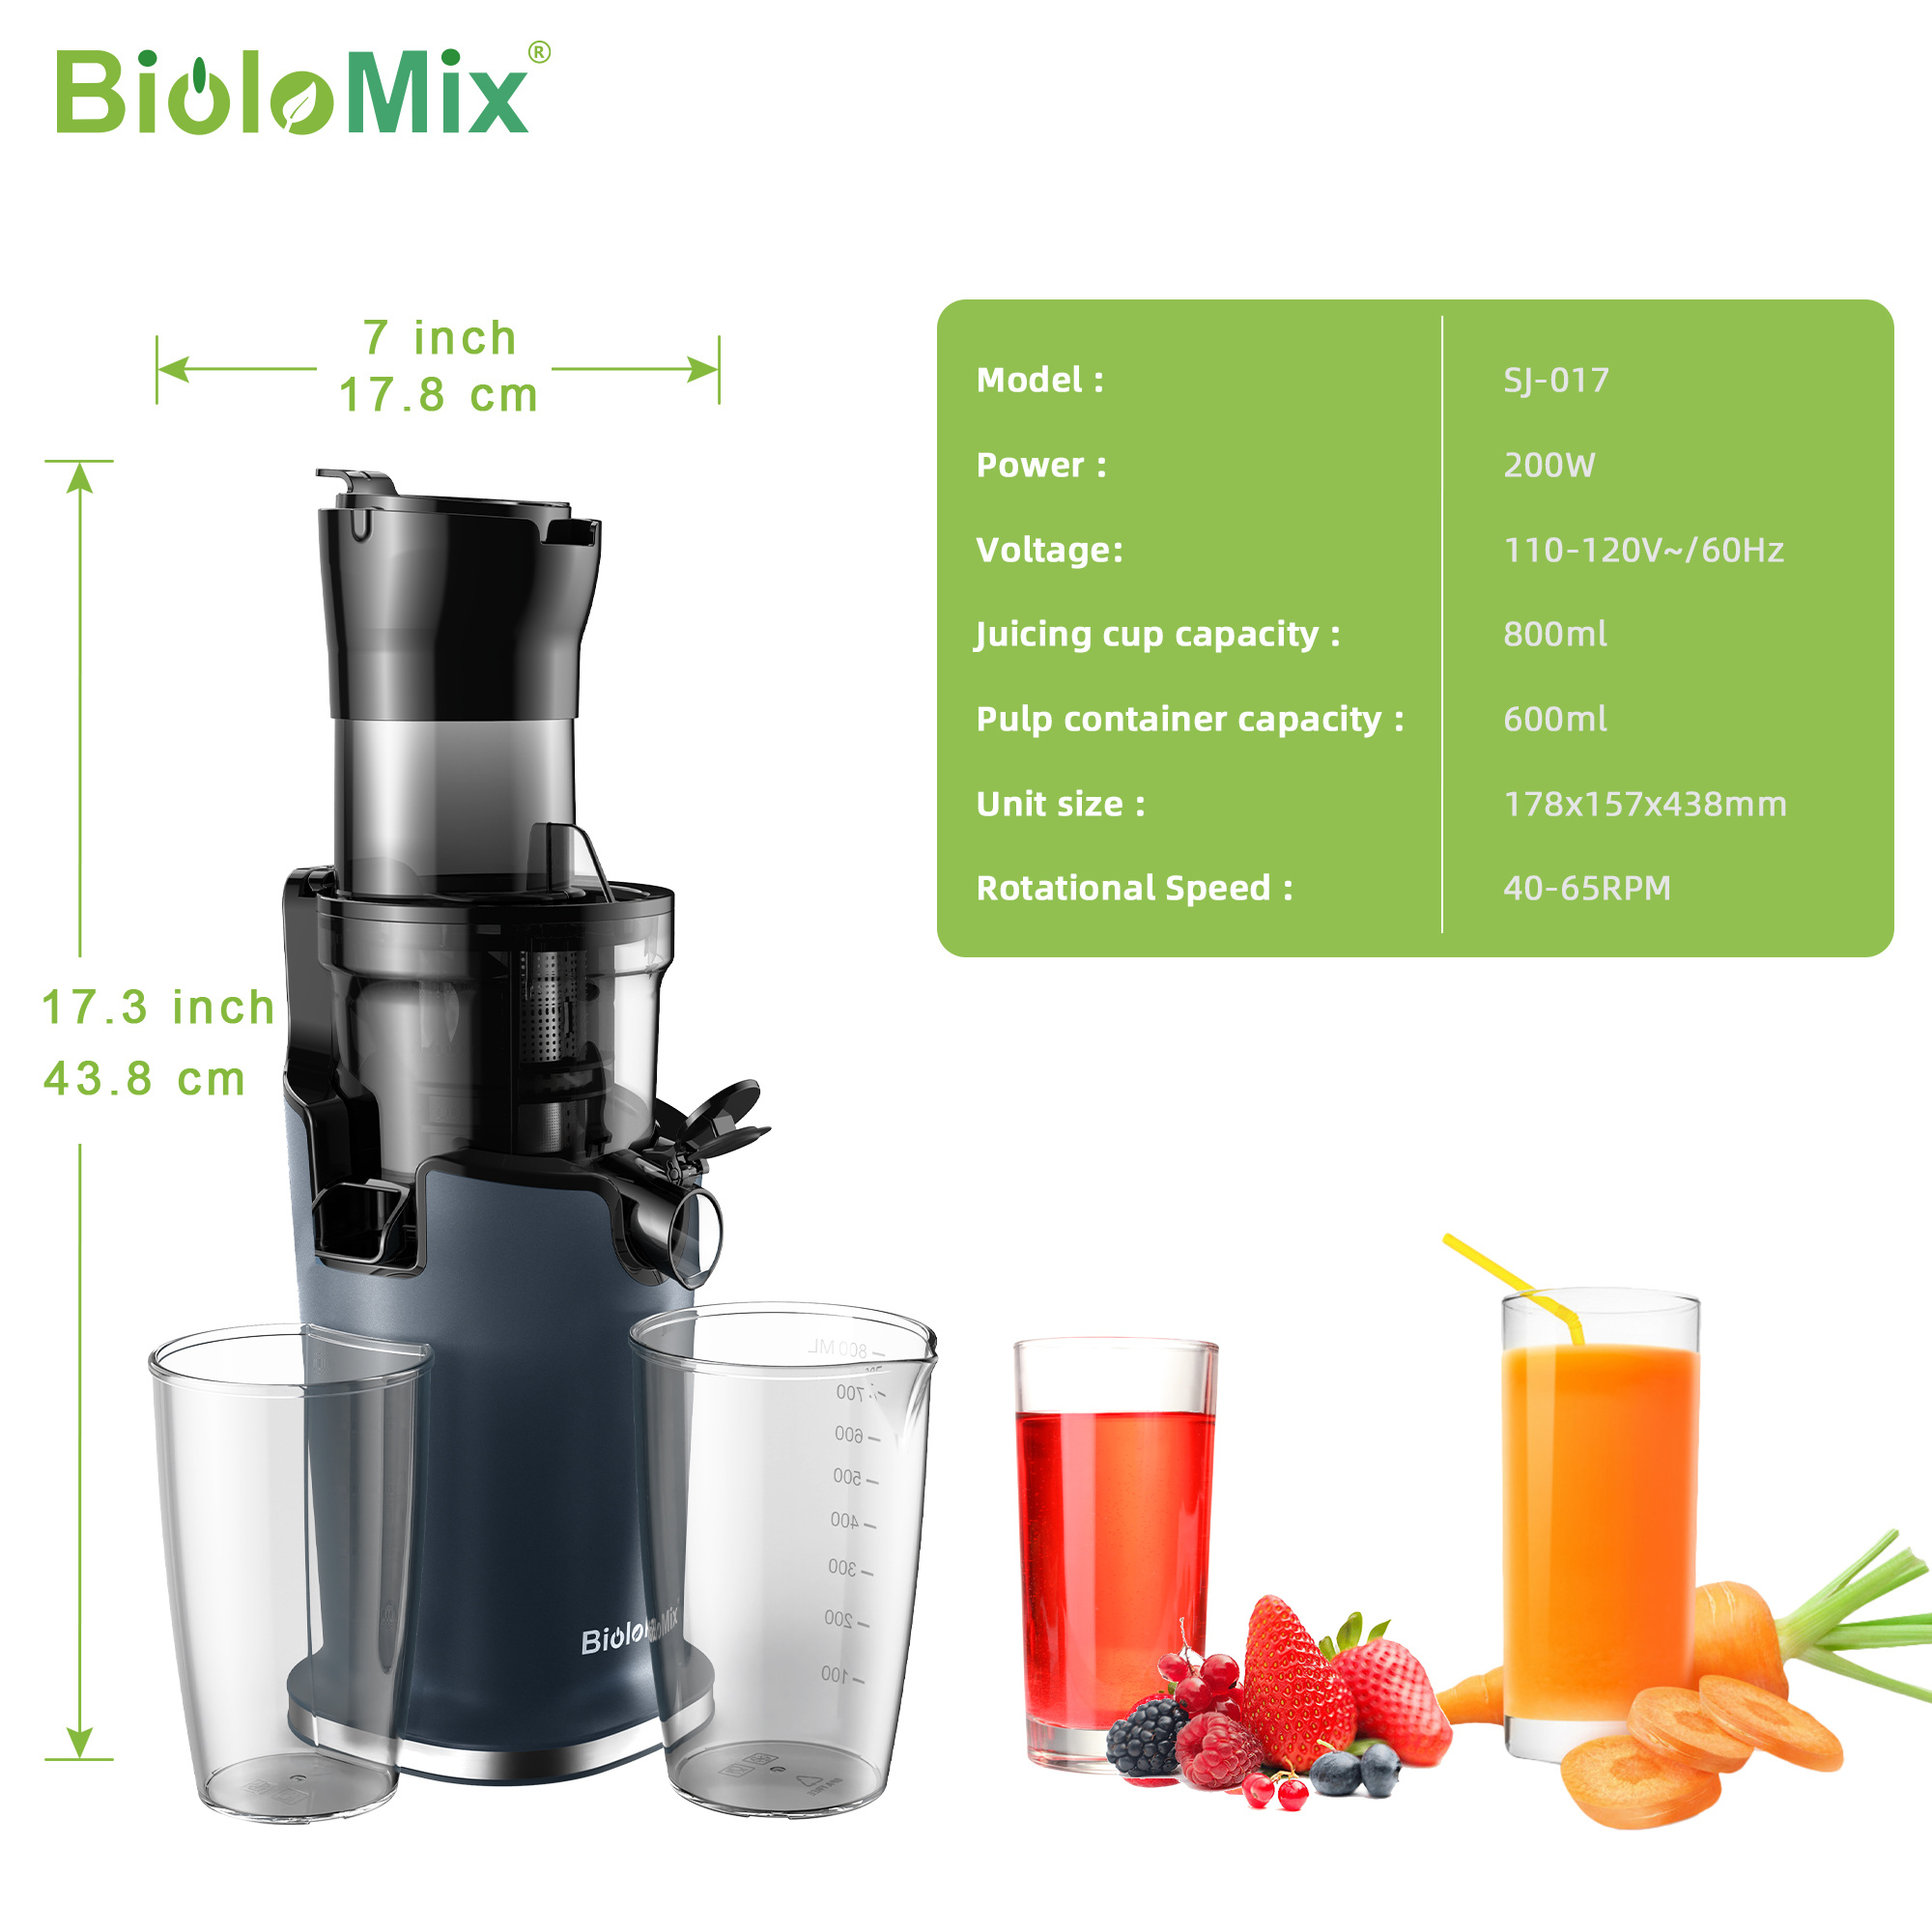 biolomix 200w cold press juicer with 3 07in feed chute tritan material slow juicer machines heavy duty masticating juice extractor fits whole fruits veggies easy to clean details 10